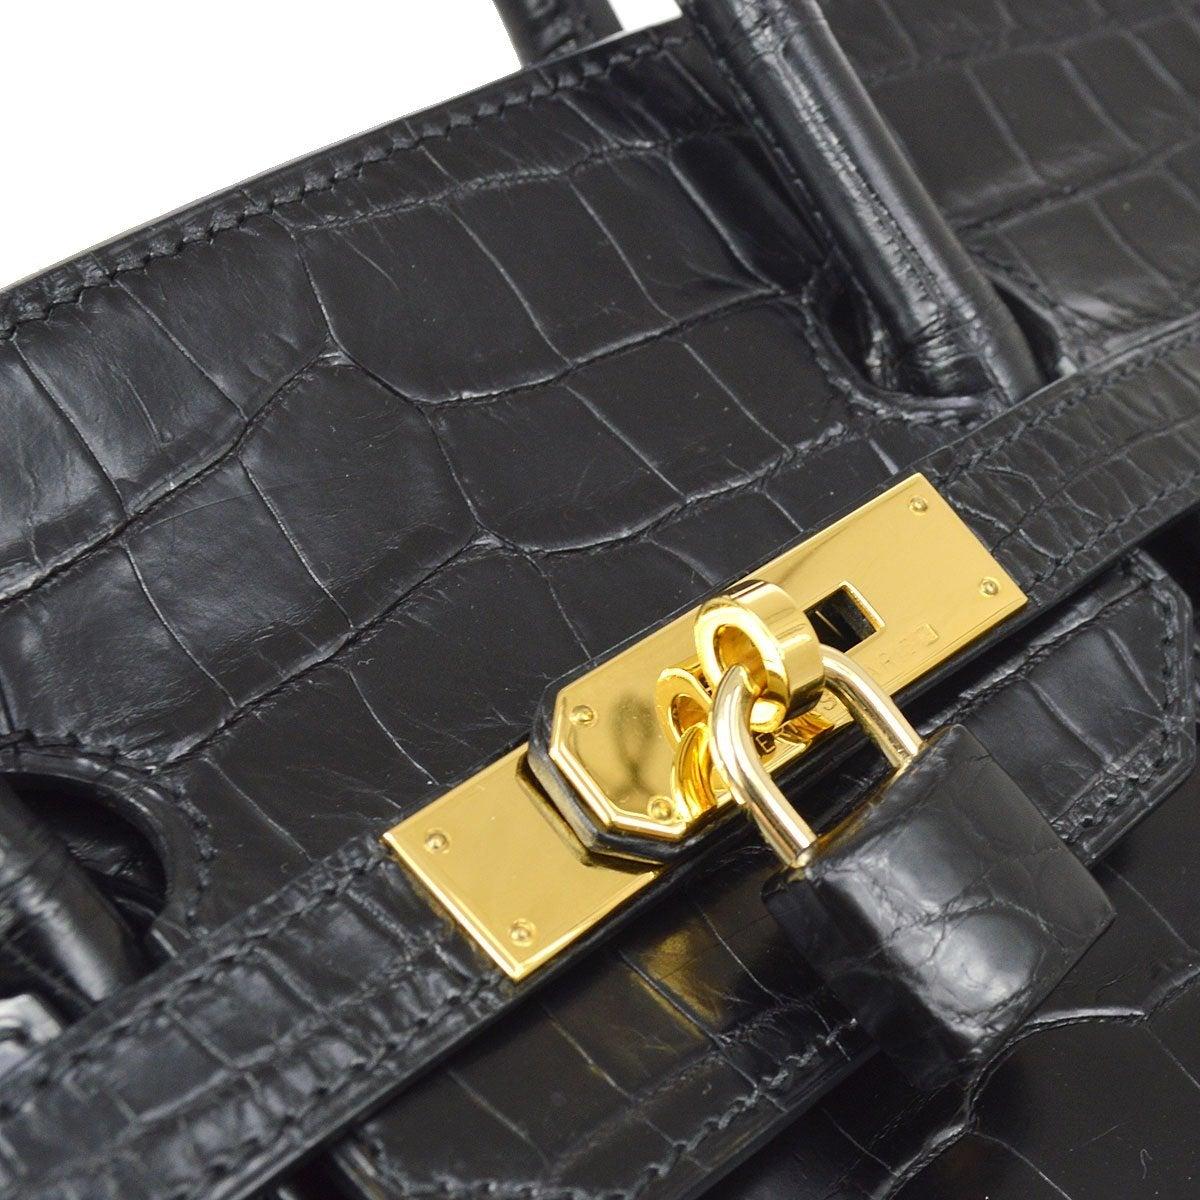 Pre-Owned Vintage Condition
From 2001 Collection
Crocodile Porosus
Gold Tone Hardware
Leather Lining
Measures 13.5